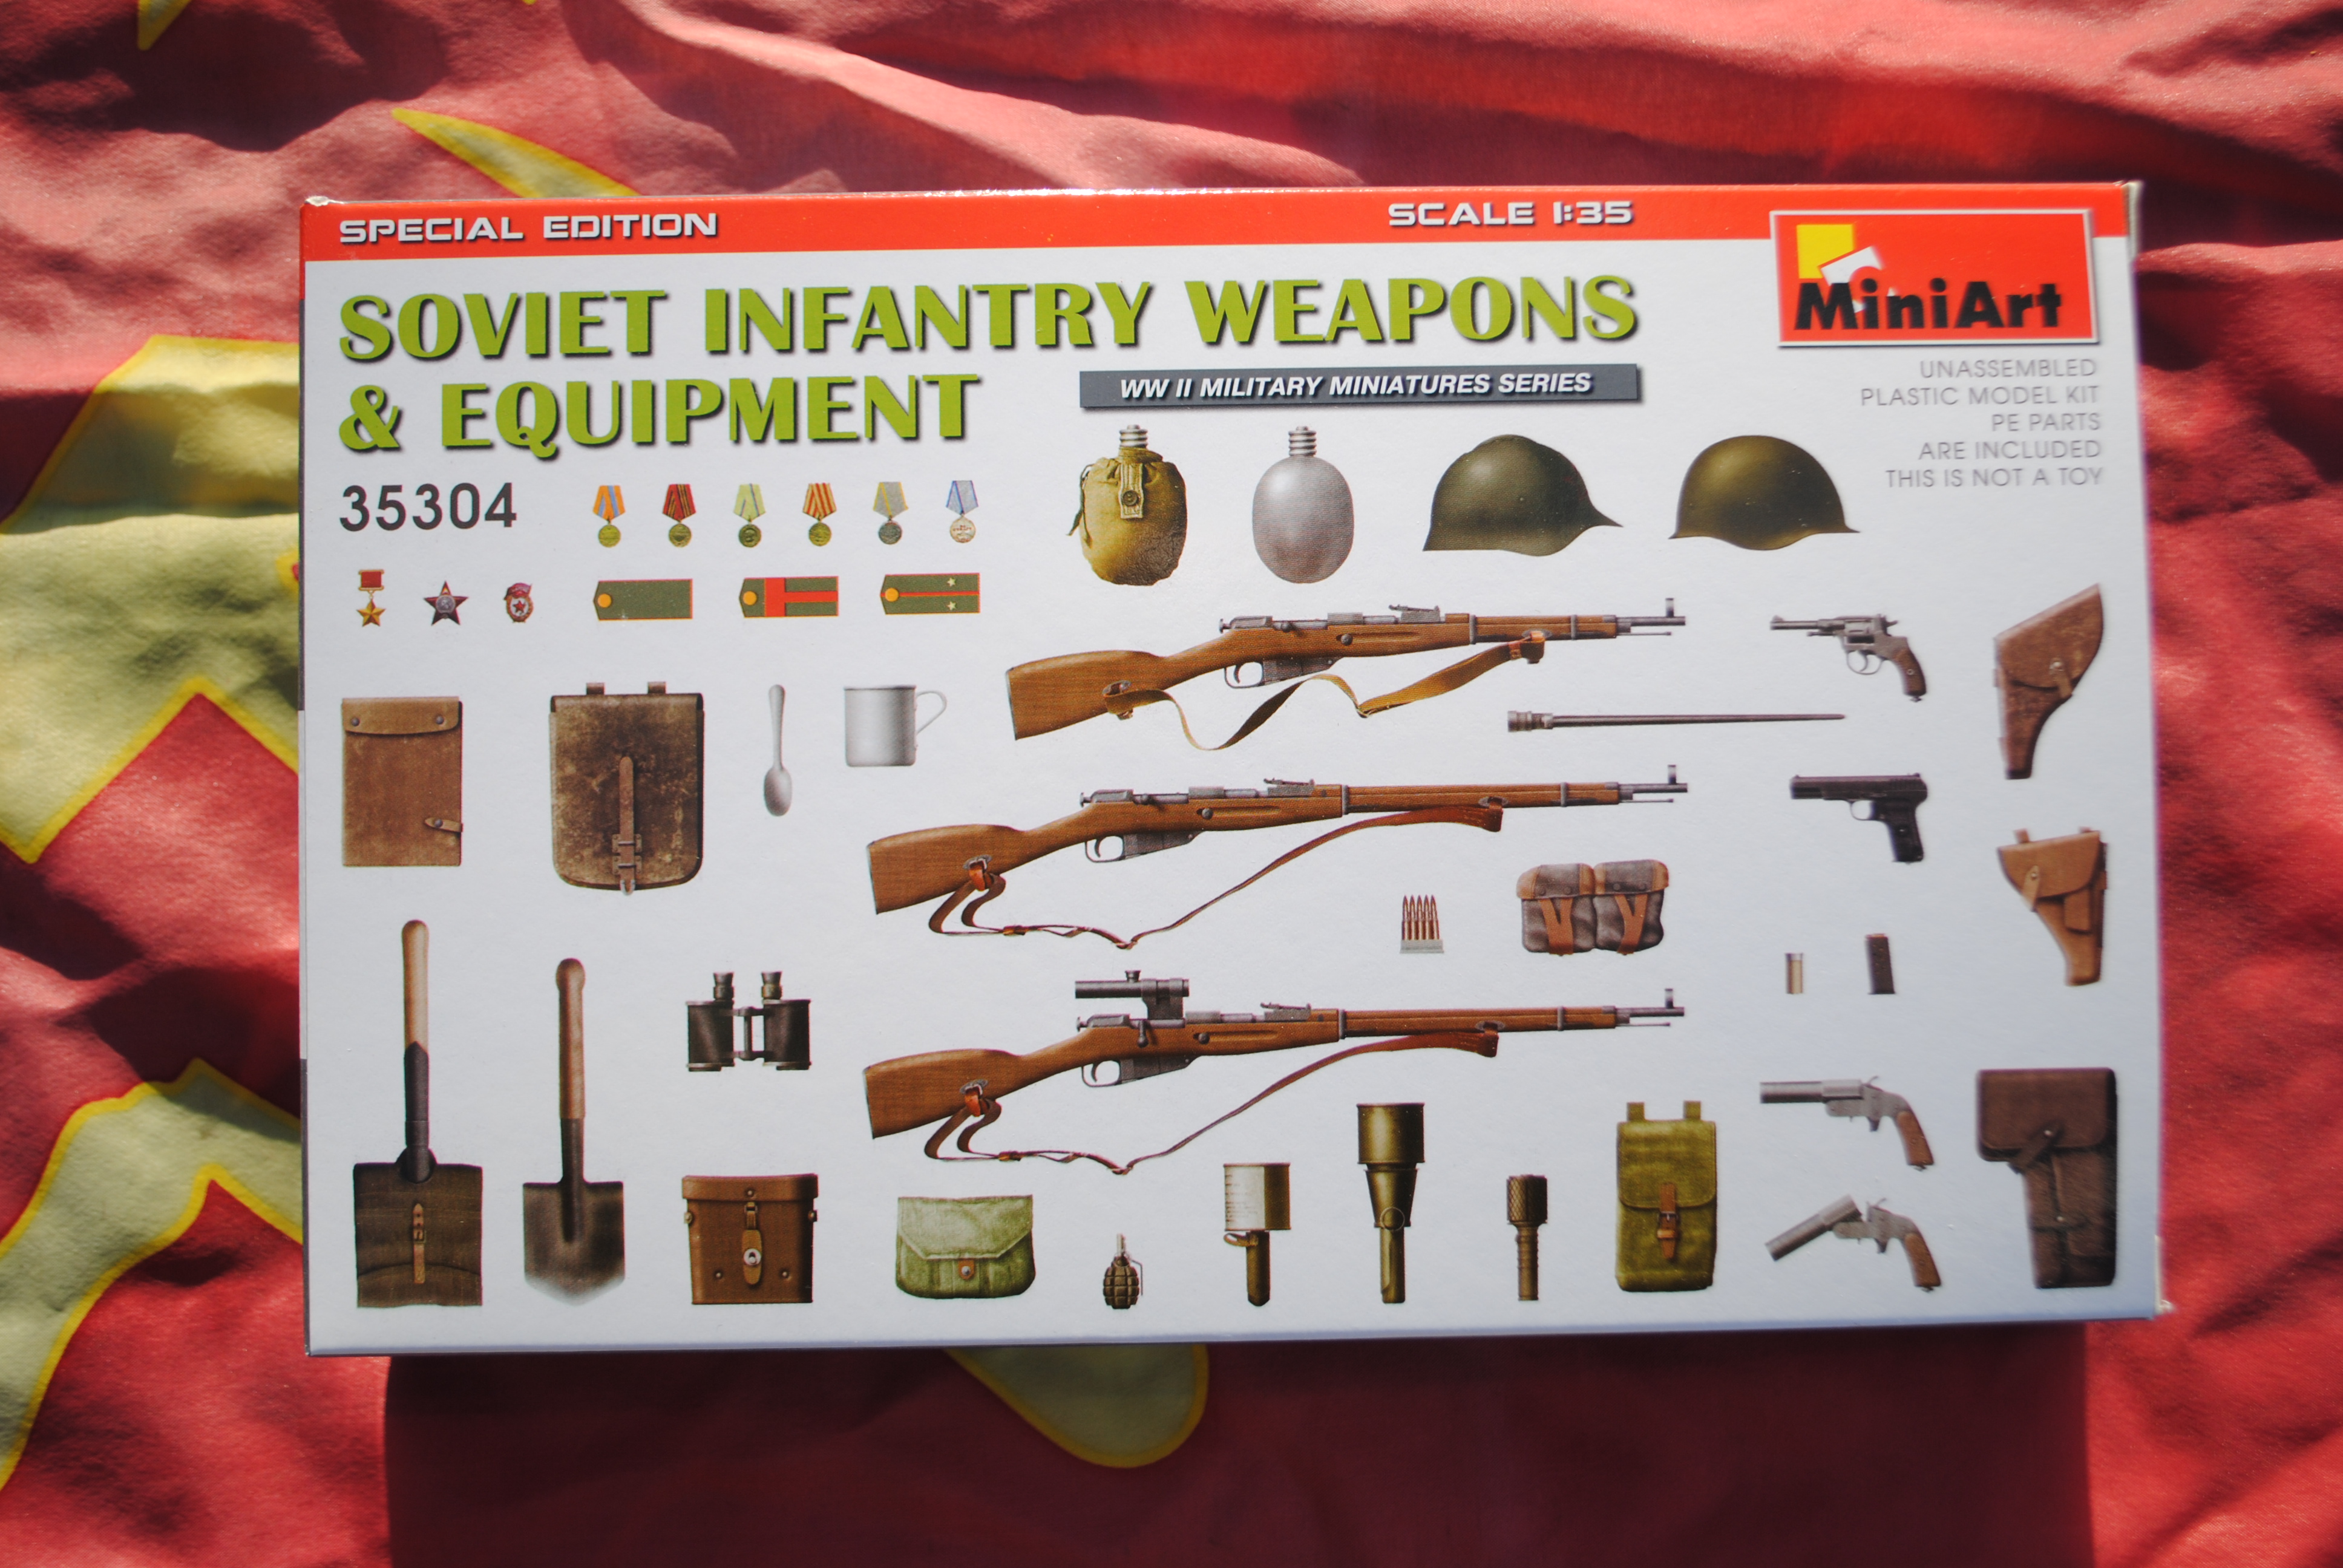 Mini Art 35304 SOVIET INFANTRY WEAPONS & EQUIPMENT. SPECIAL EDITION